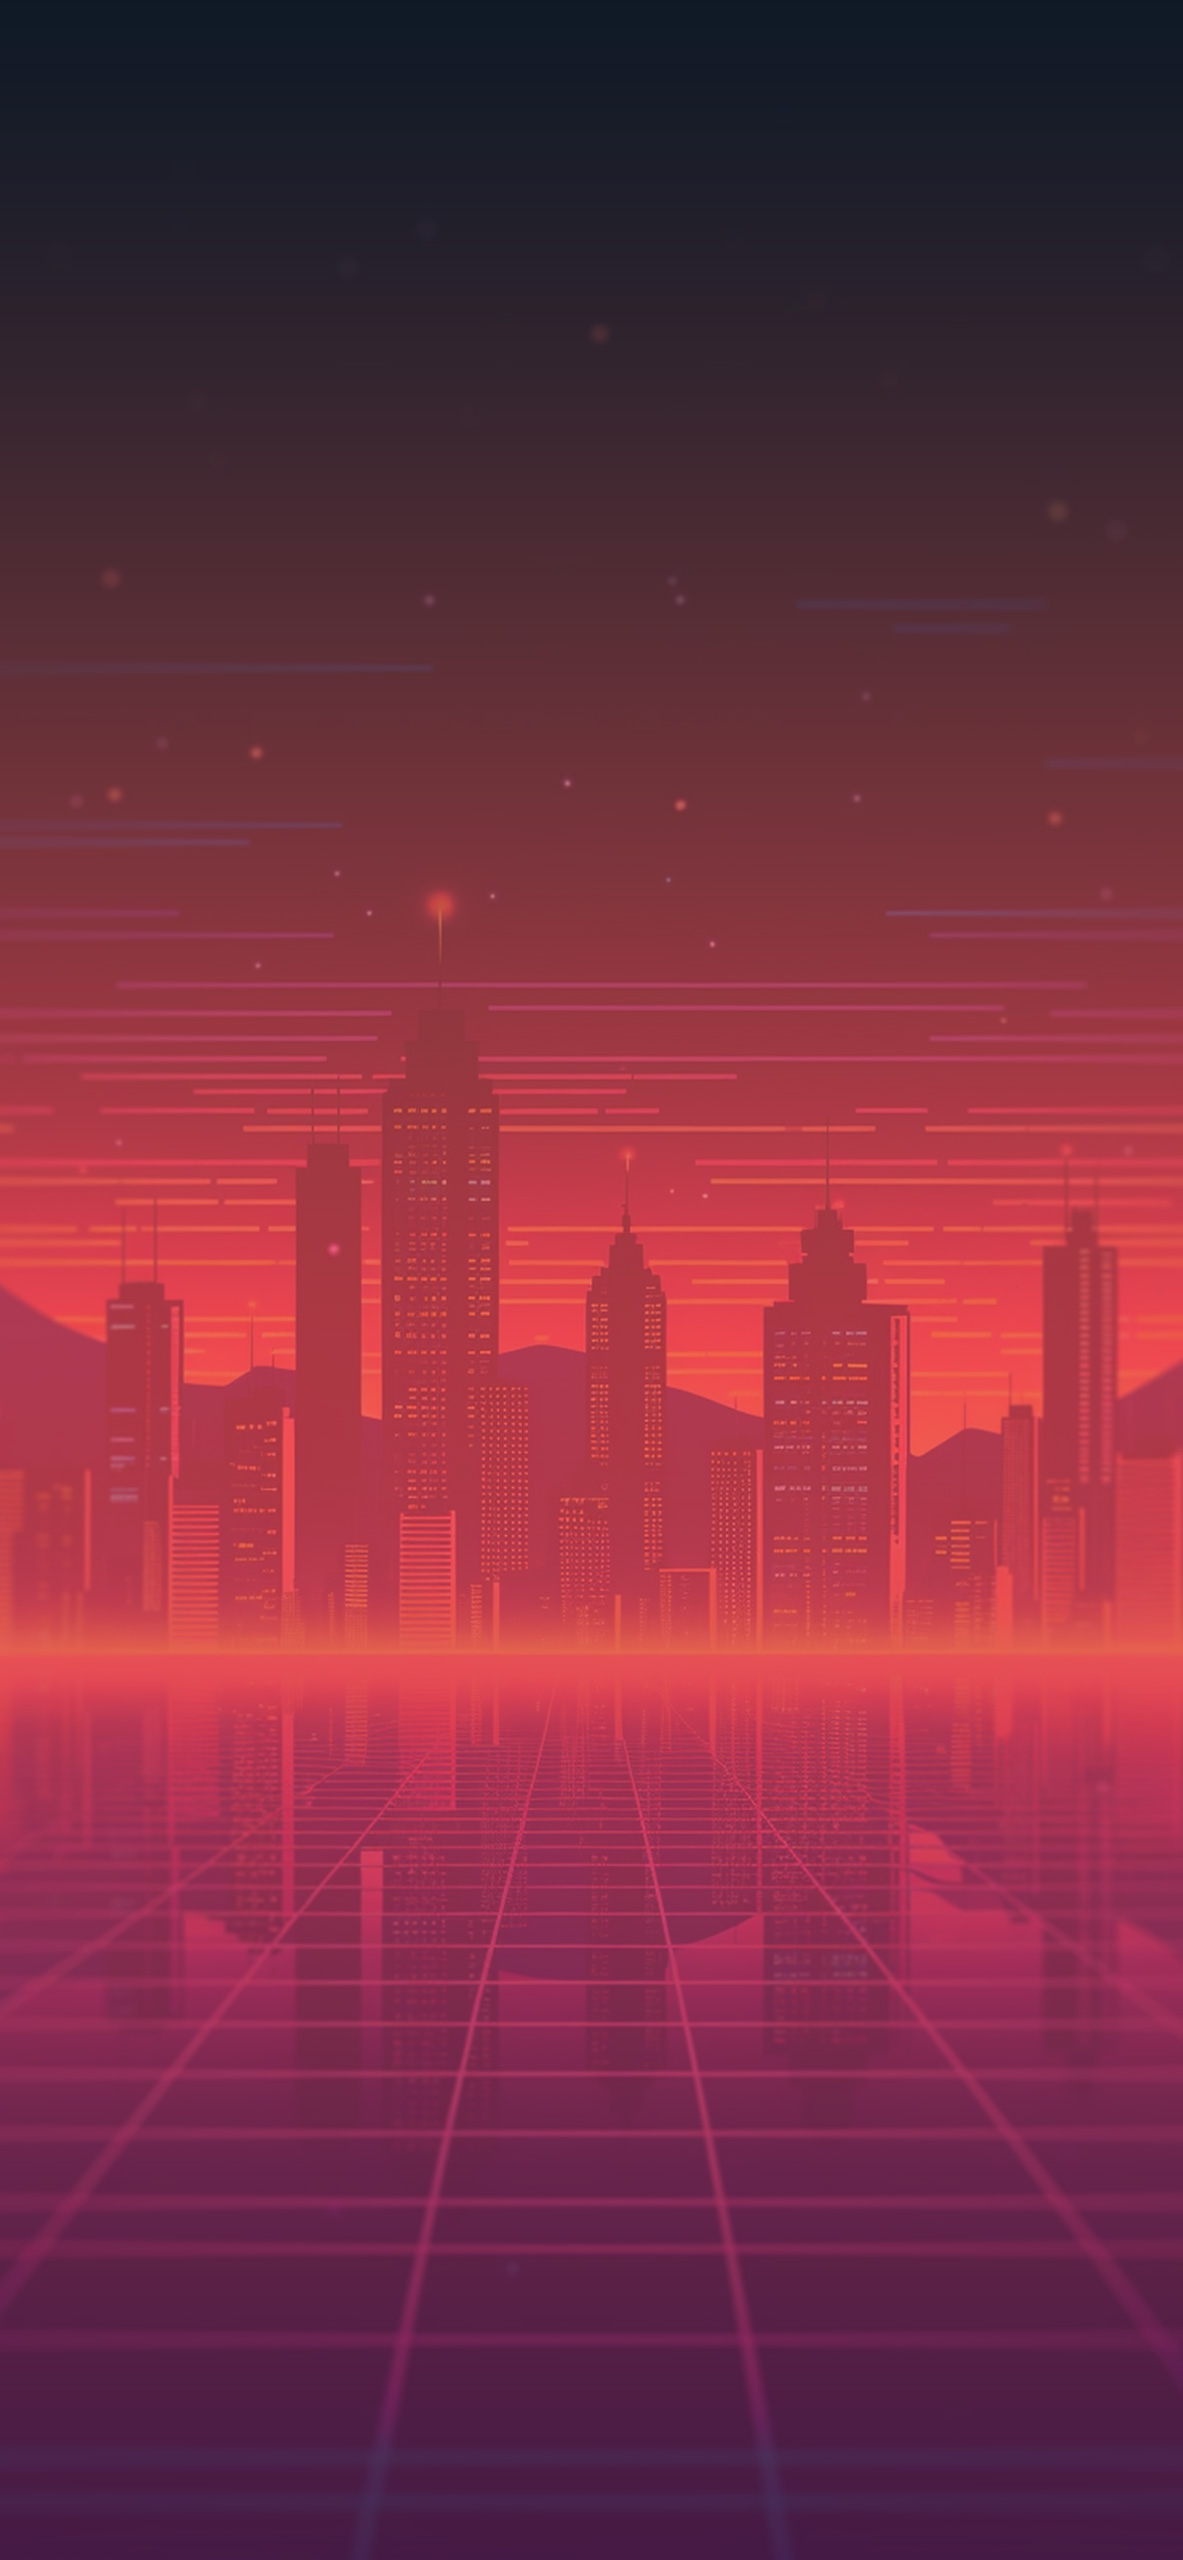 Wallpaper ID 503613  City 1080P Sintav 80s Futuresynth New Retro  Wave Retrouve Synth 80s The sun Illustration Synthwave Background  Neon Outrun Music Retrowave free download